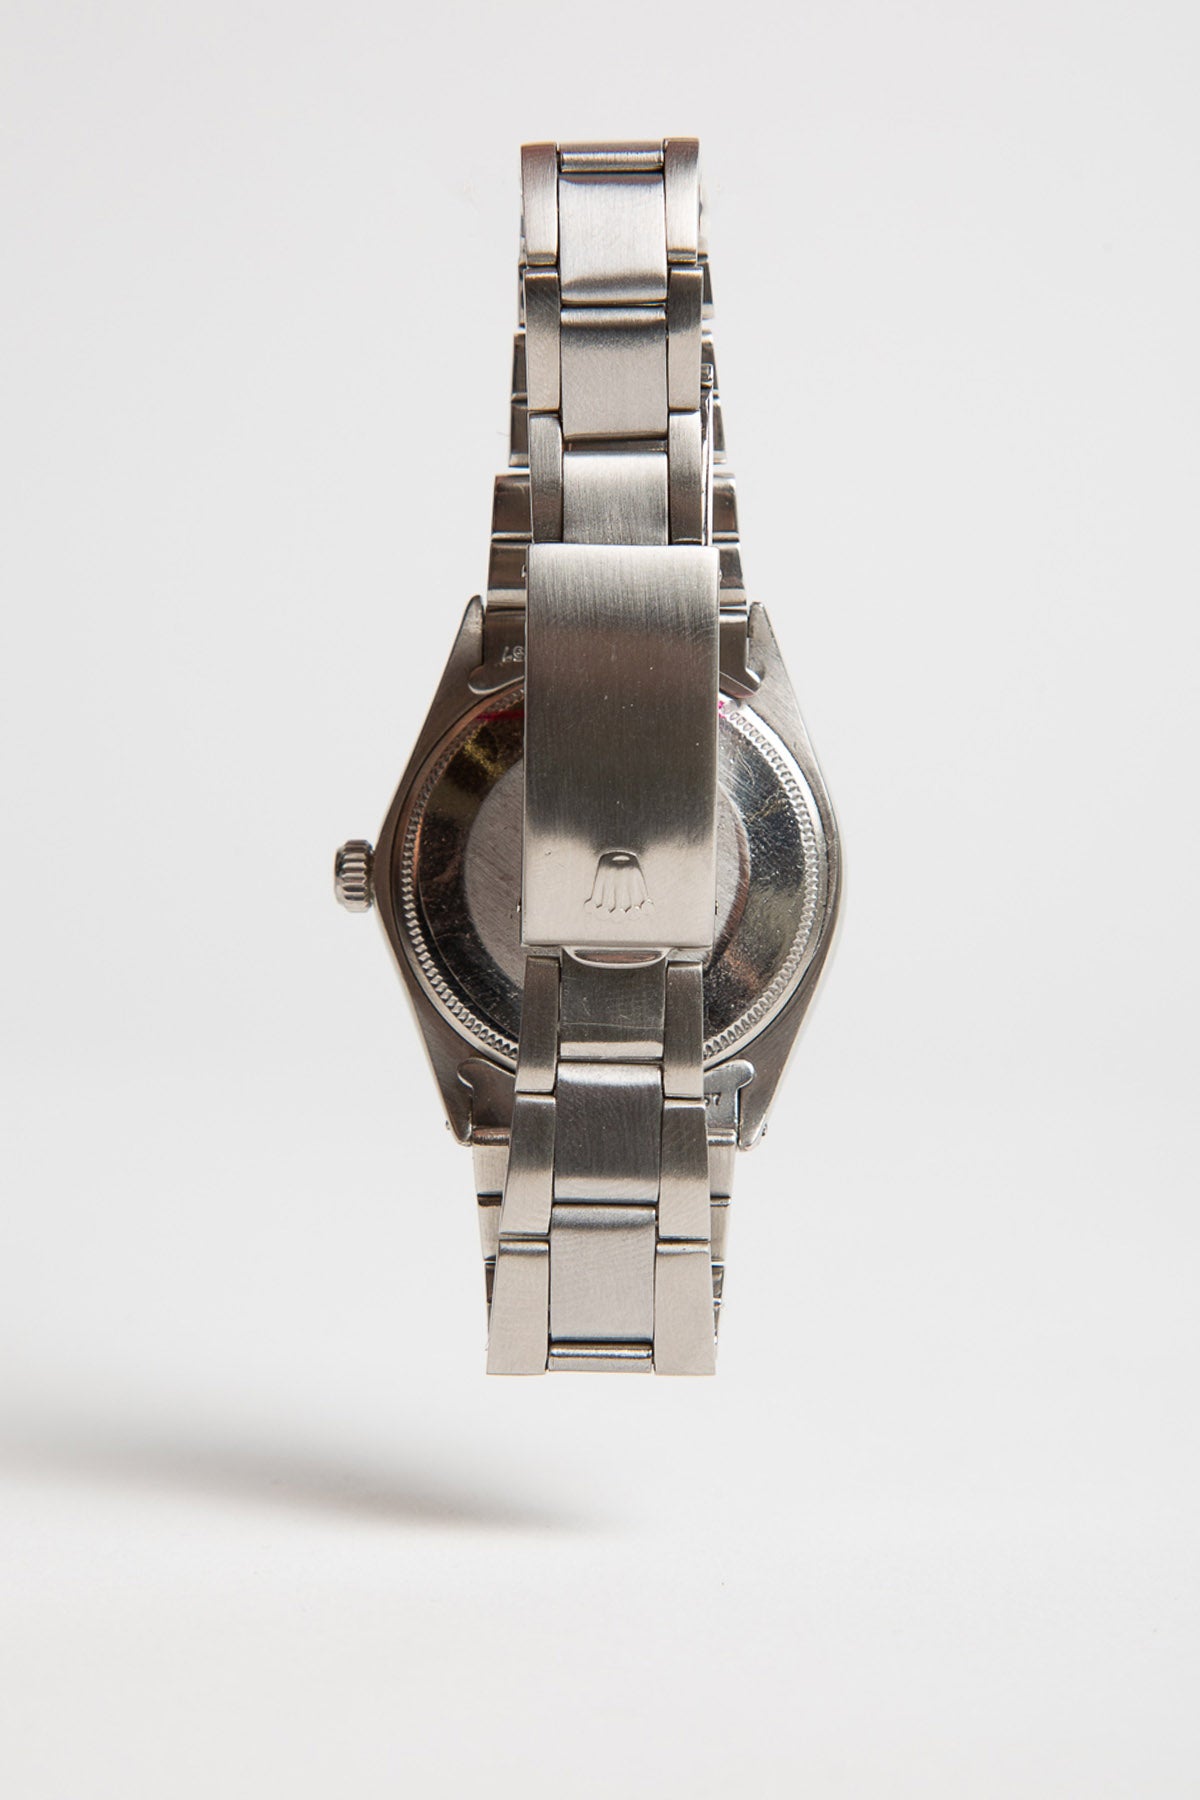 MAXFIELD PRIVATE COLLECTION | 73-74 ROLEX OYSTER PERPETUAL AIR-KING